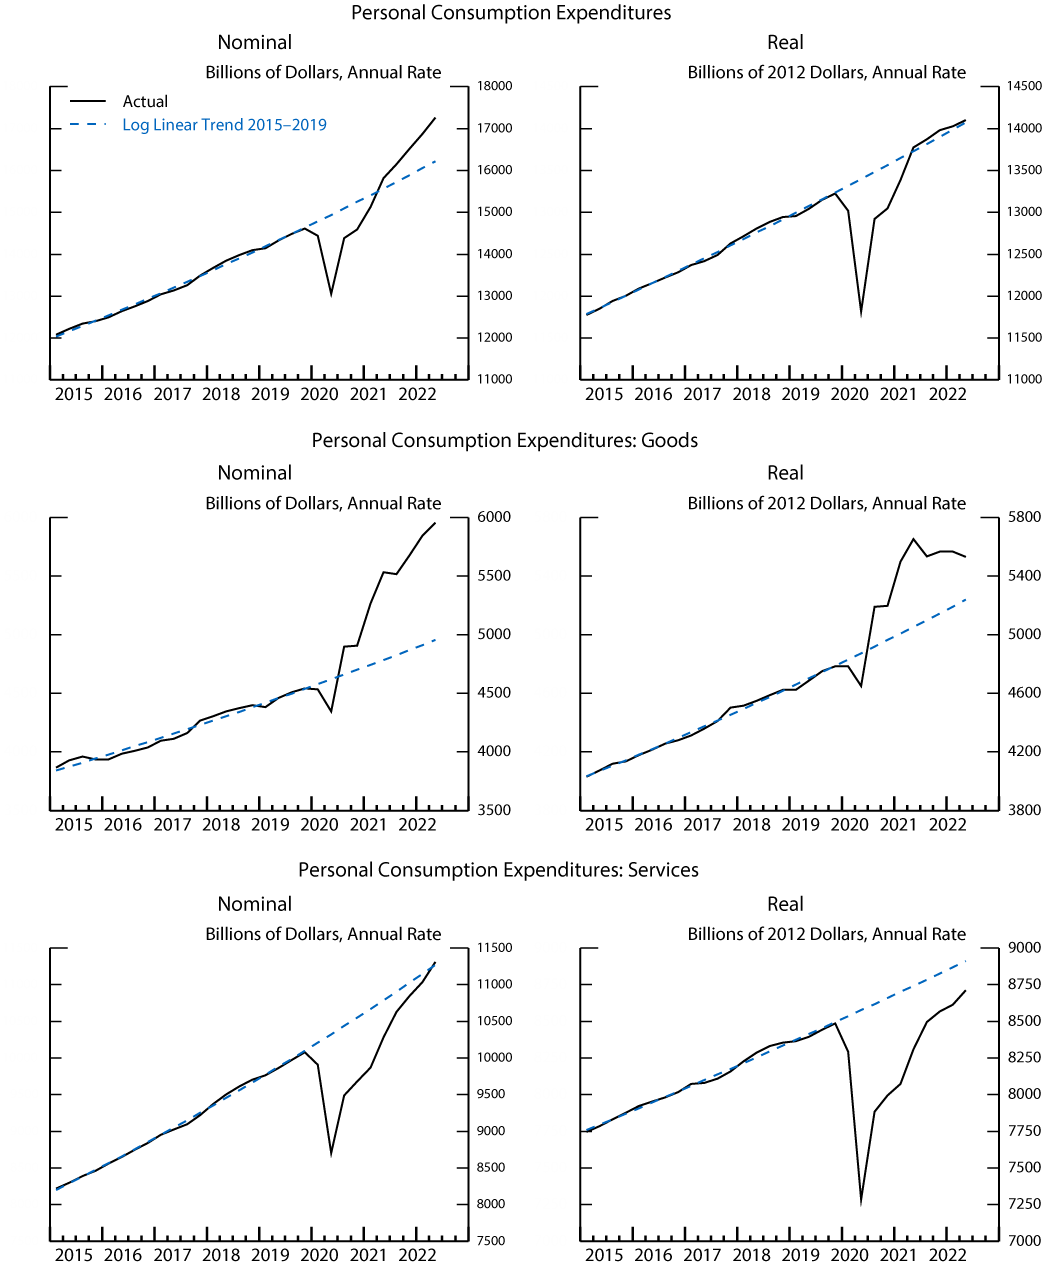 Figure 3. Nominal and Real PCE on Goods and Services. See accessible link for data.